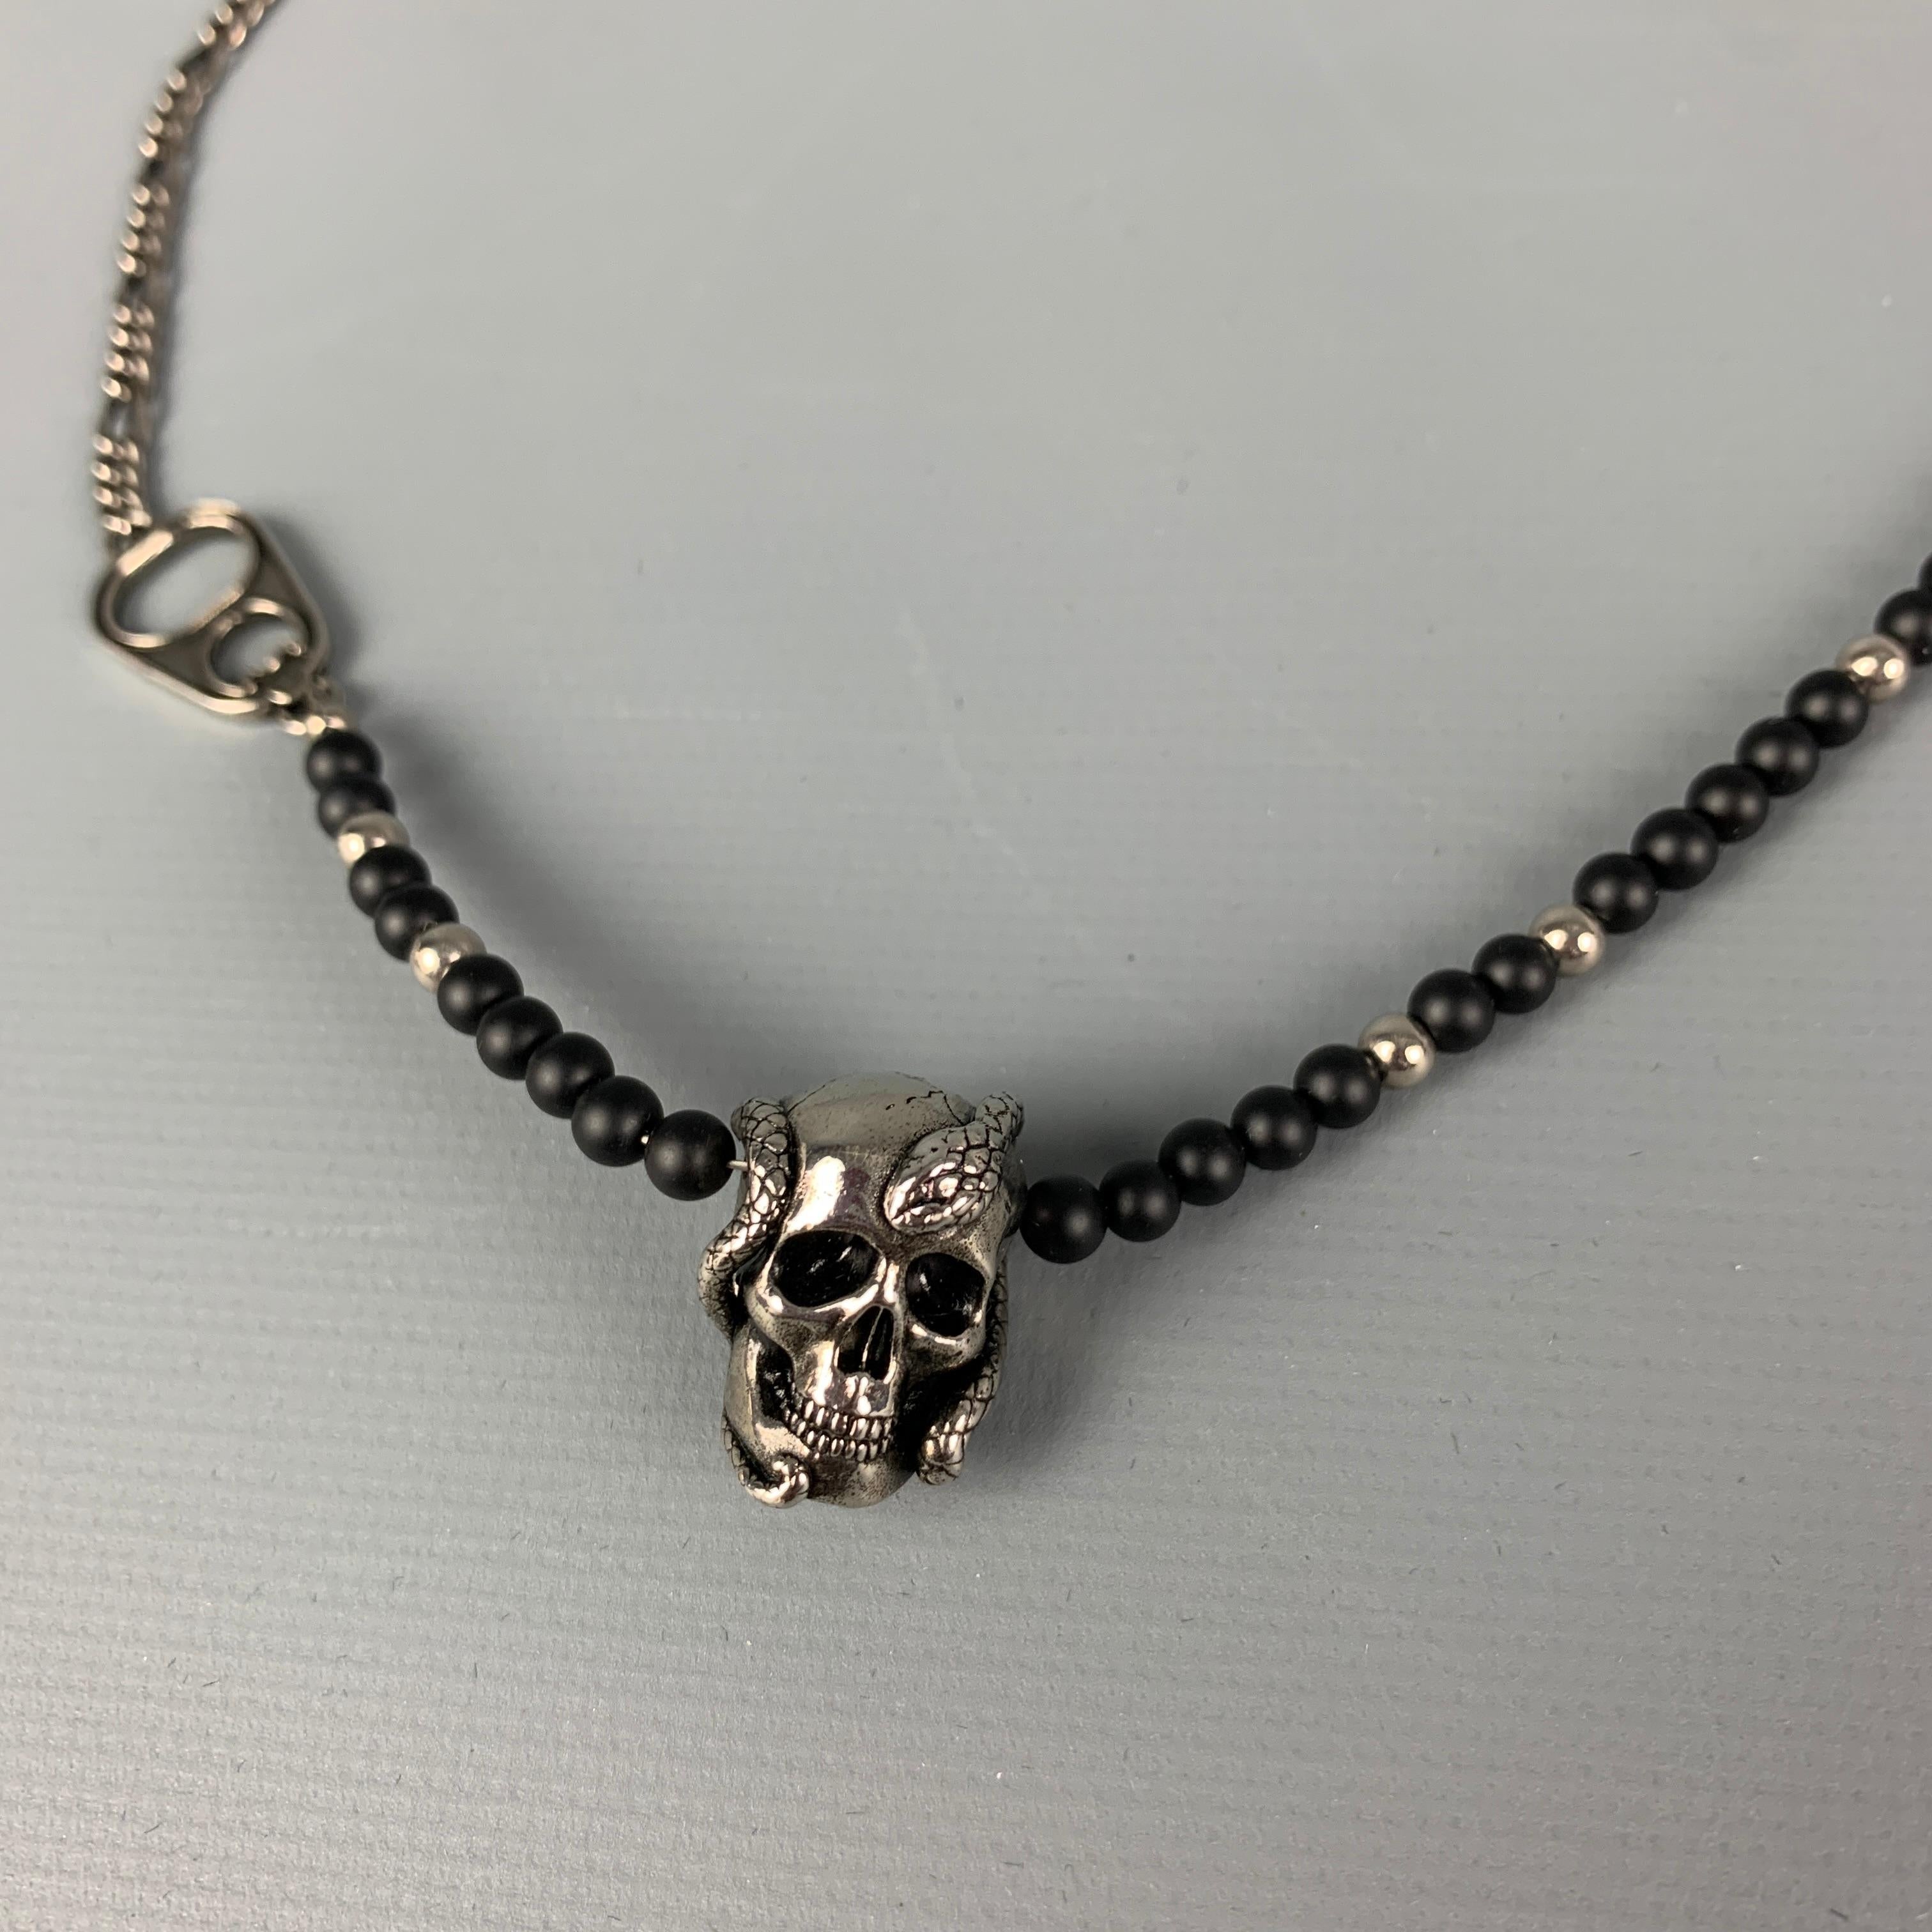 ALEXANDER MCQUEEN necklace comes in a silver tone metal chain link featuring black beads, skull detail, and a clasp closure. Comes with box. 

Excellent Pre-Owned Condition.

Measurements:

Length: 20 in. 